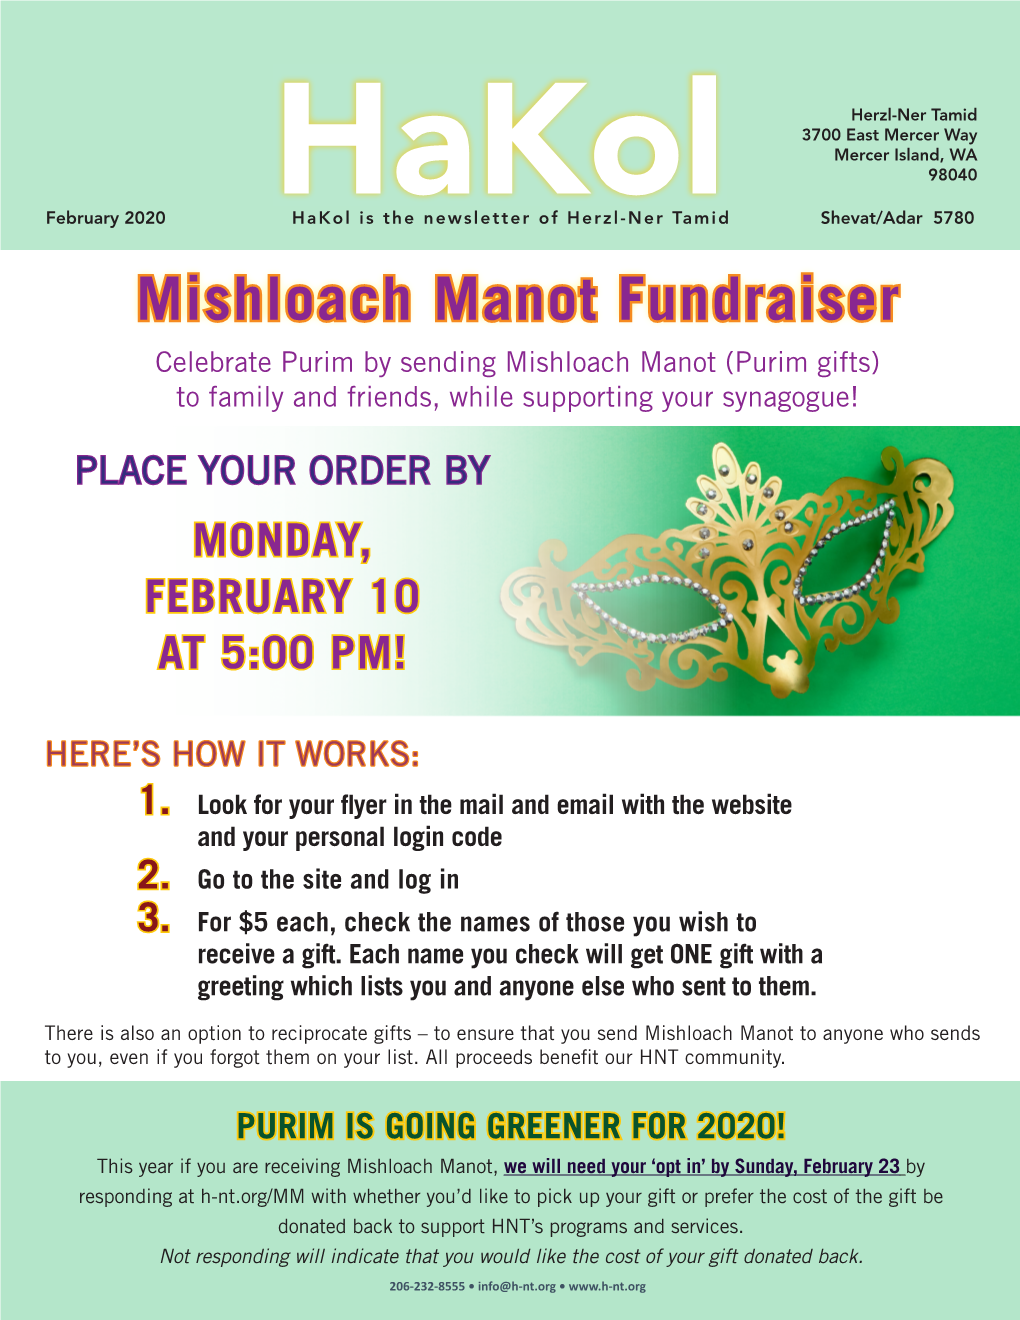 Mishloach Manot Fundraiser Celebrate Purim by Sending Mishloach Manot (Purim Gifts) to Family and Friends, While Supporting Your Synagogue!